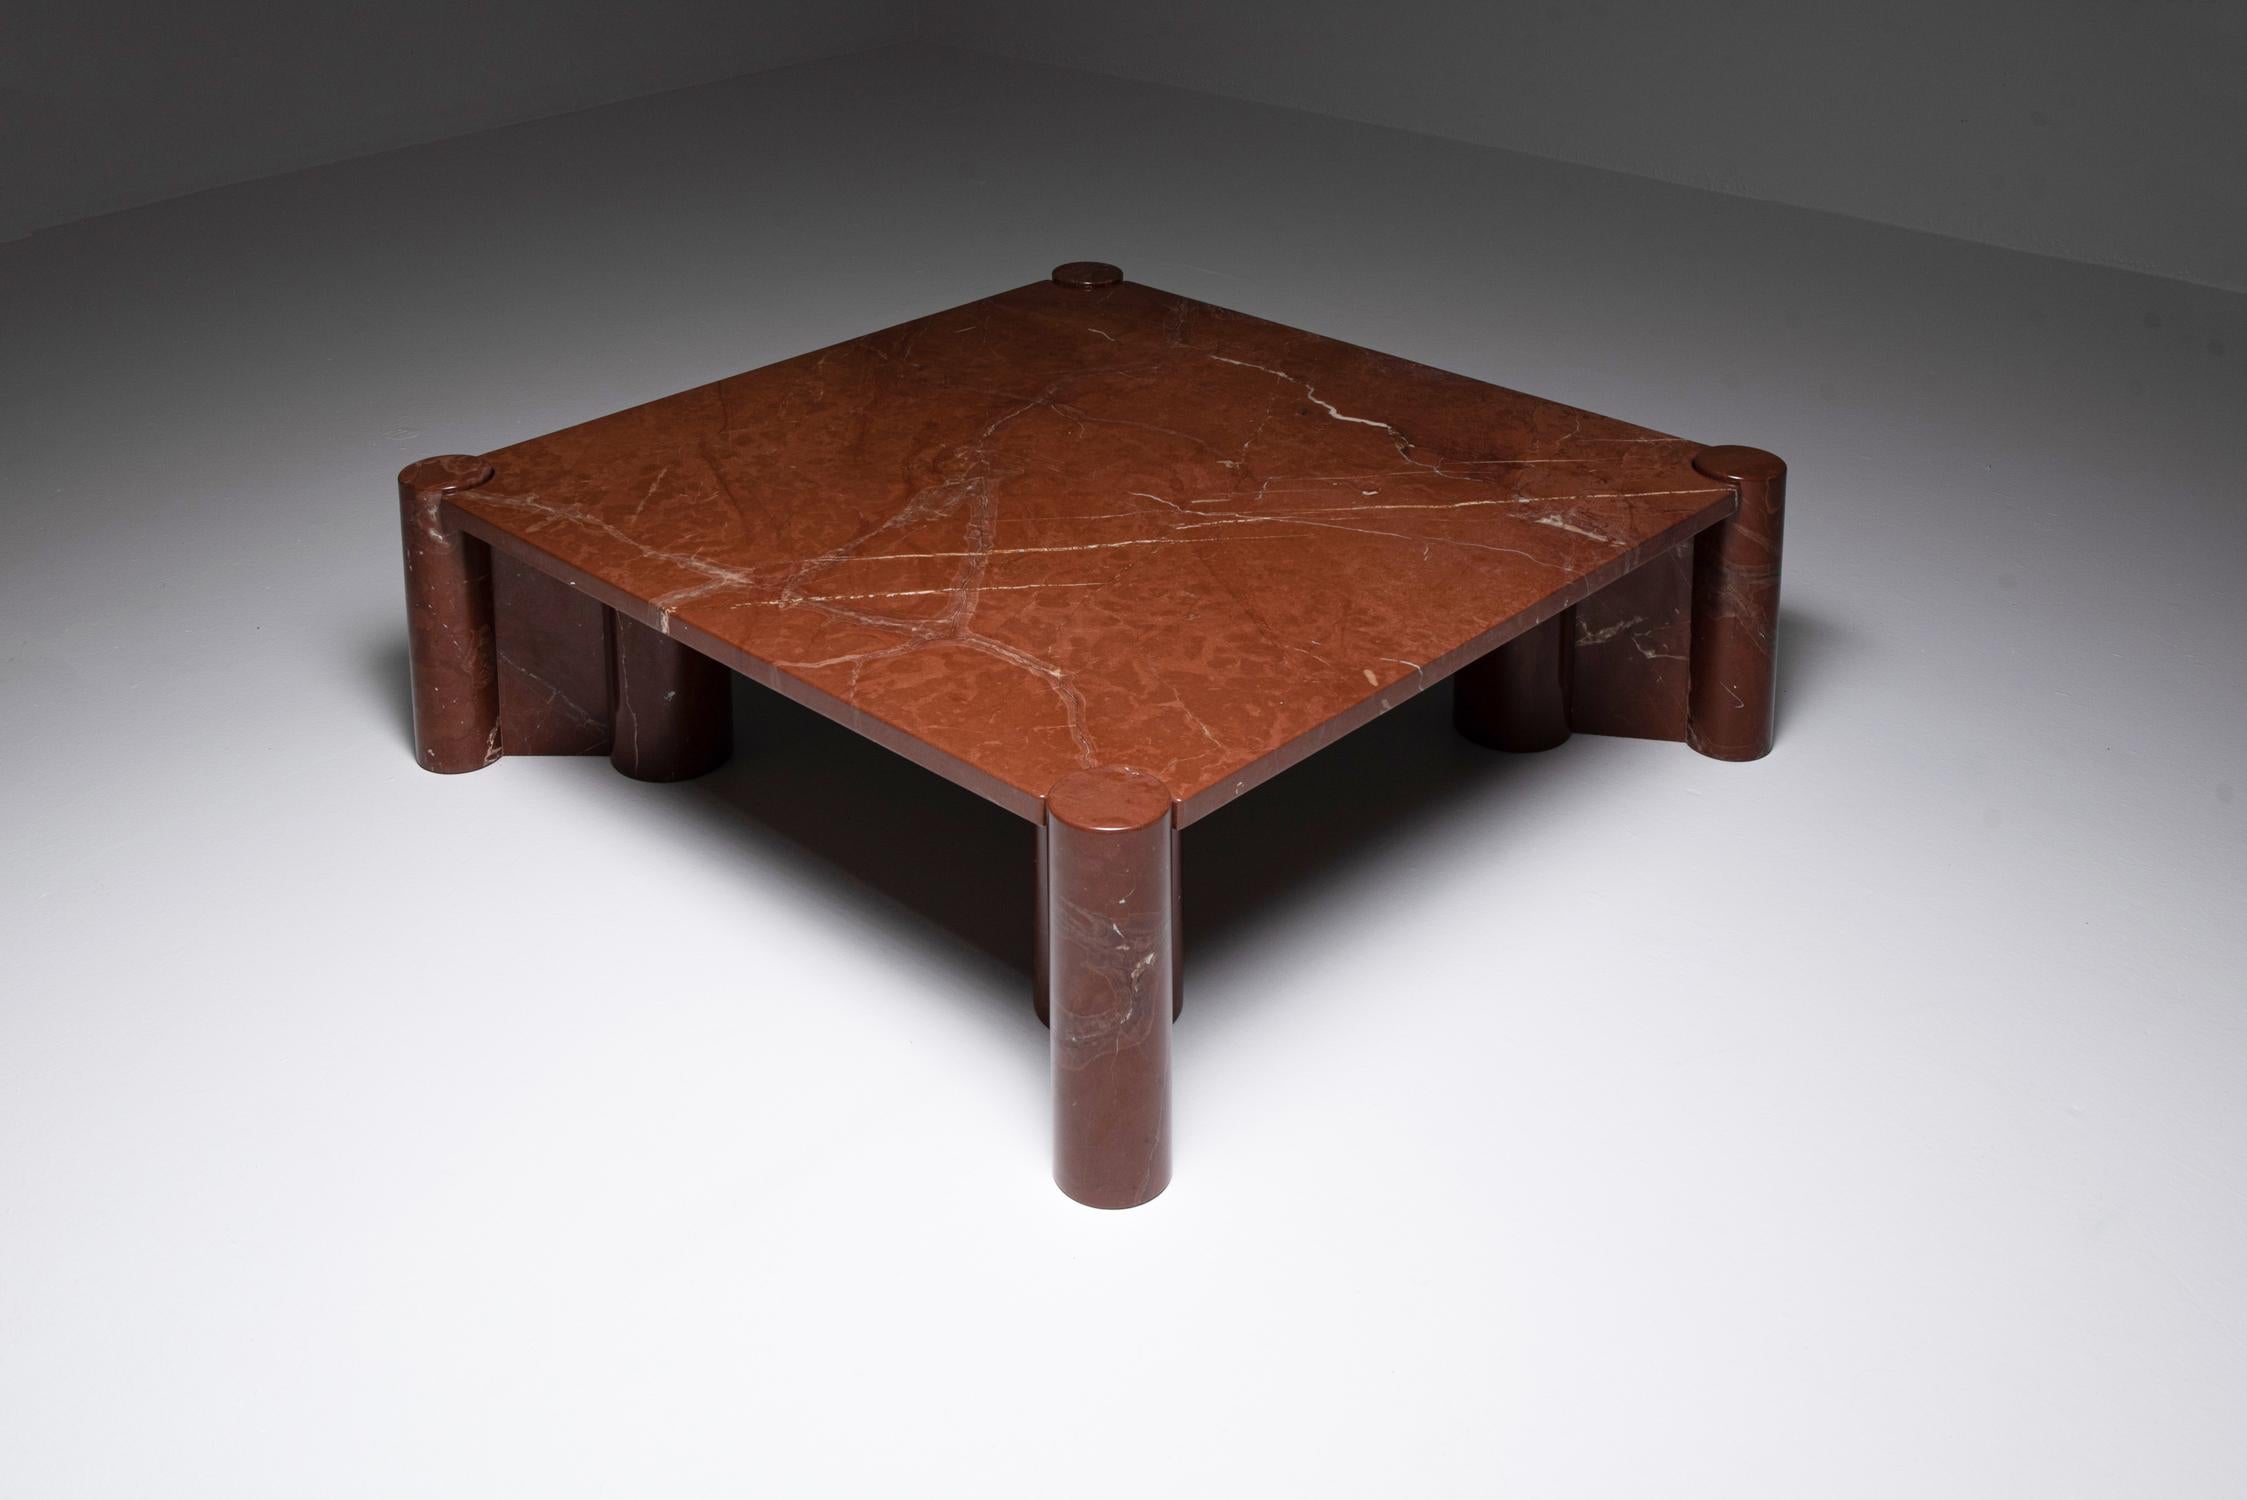 Marble coffee table, Jumbo, Gae Aulenti, Knoll, 1960s, Italy.

Gae Aulenti Jumbo table for Knoll in Rosso Collemandina marble top and column legs.
Designed in 1964, produced by Gavina, later by Knoll.

The Rosso Collemandina marble was